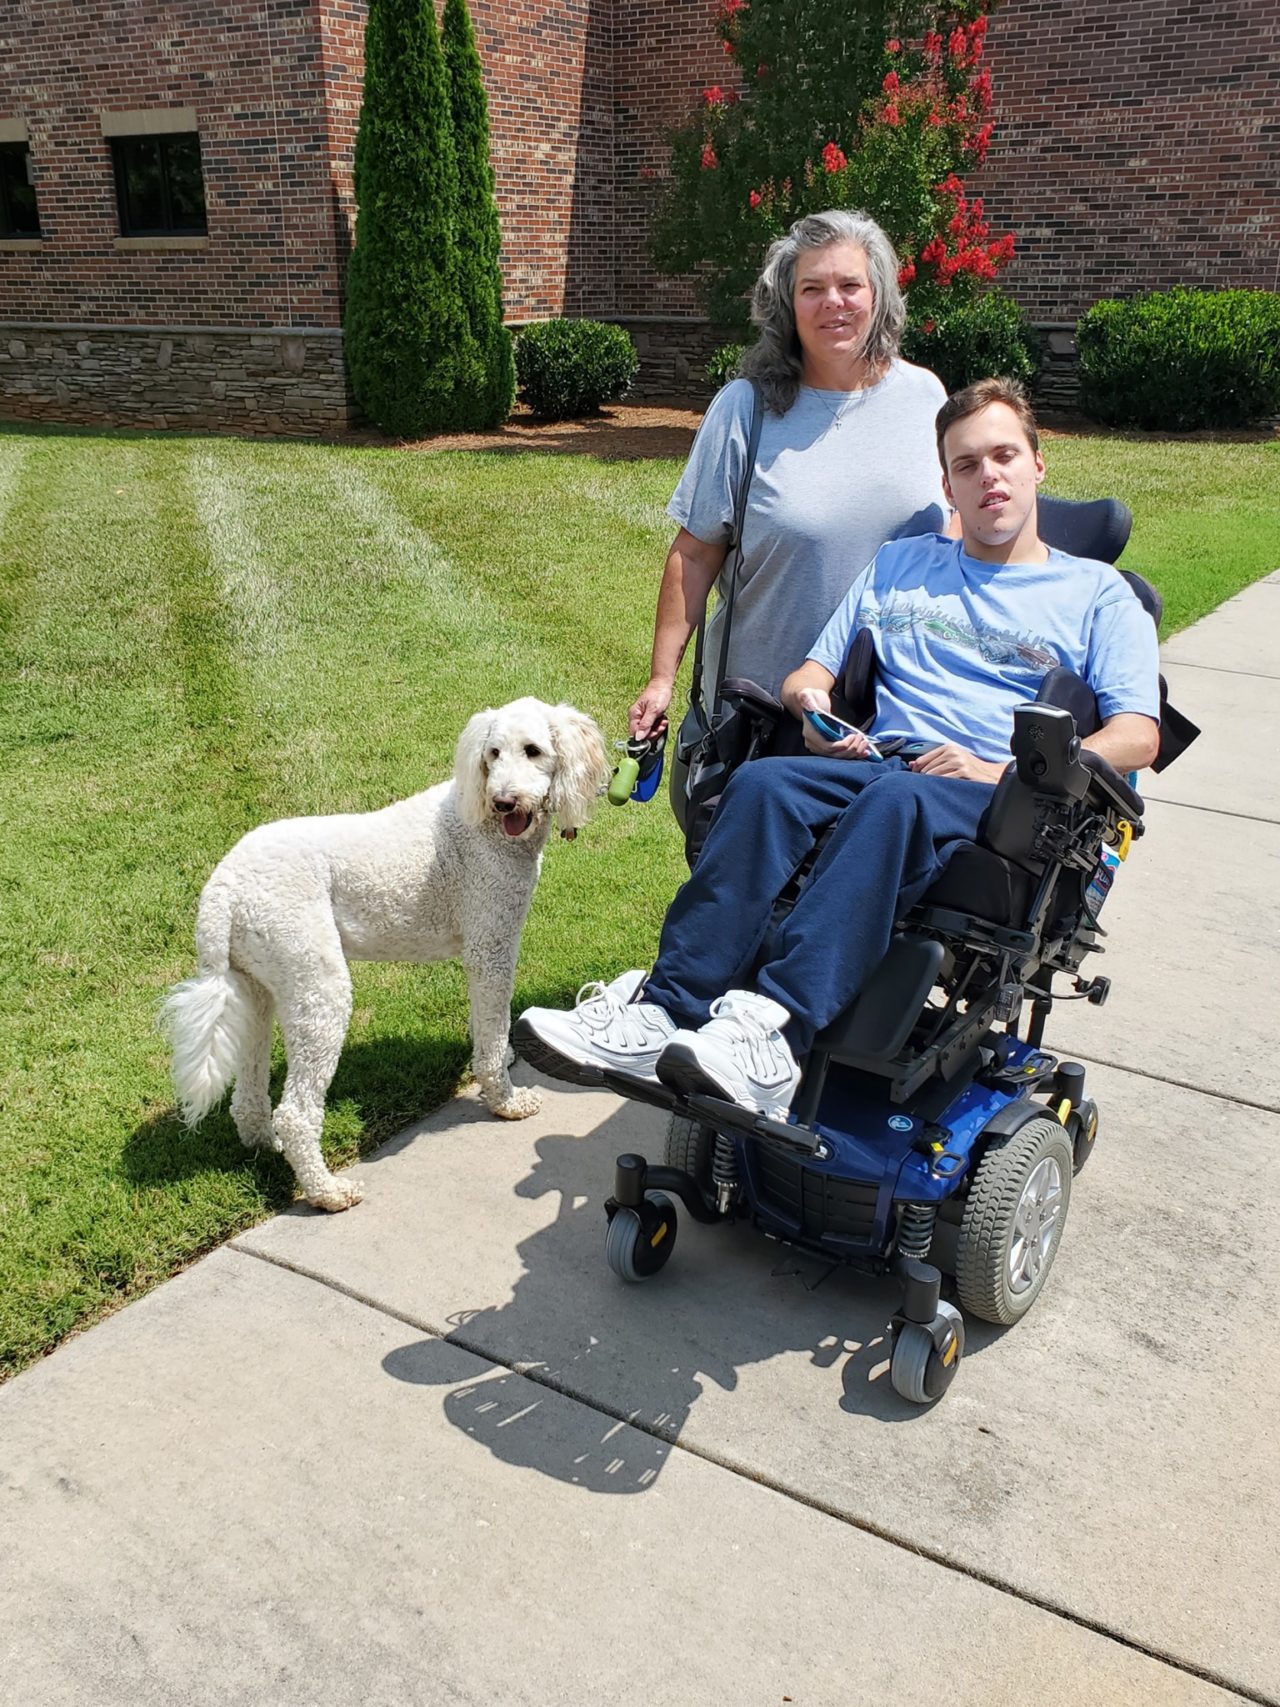 A mom stands beside a young man in a wheelchair. A white dog stands beside them.